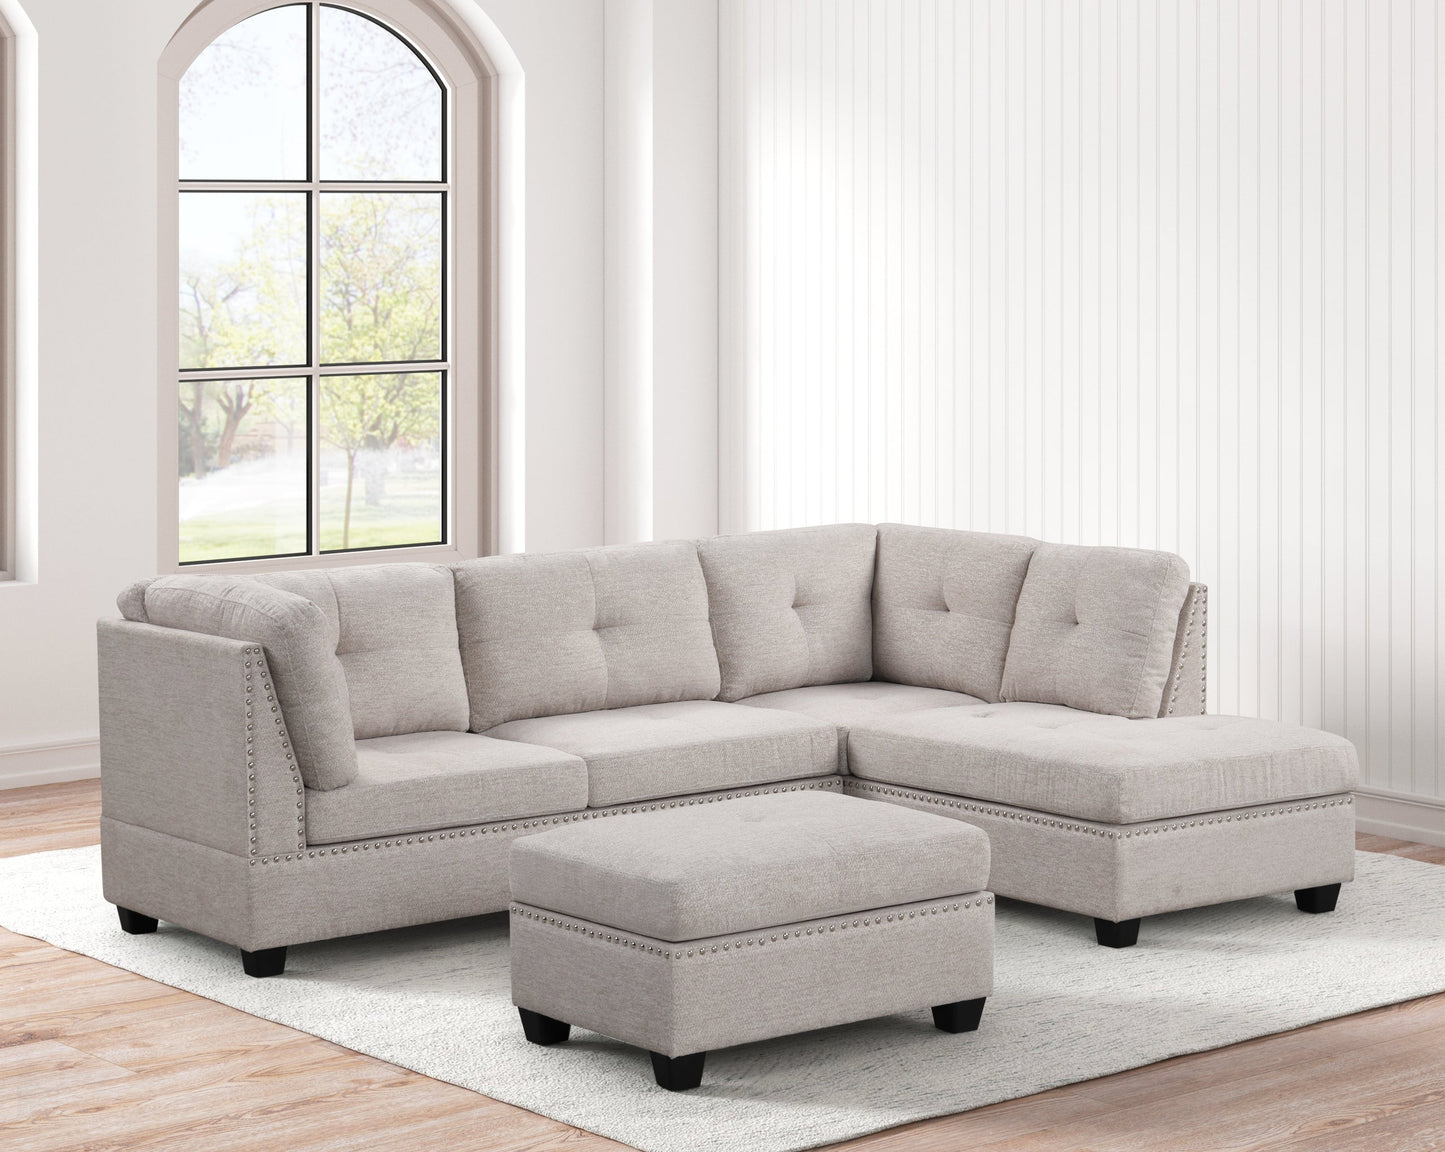 Sienna Stone Sectional with Ottoman